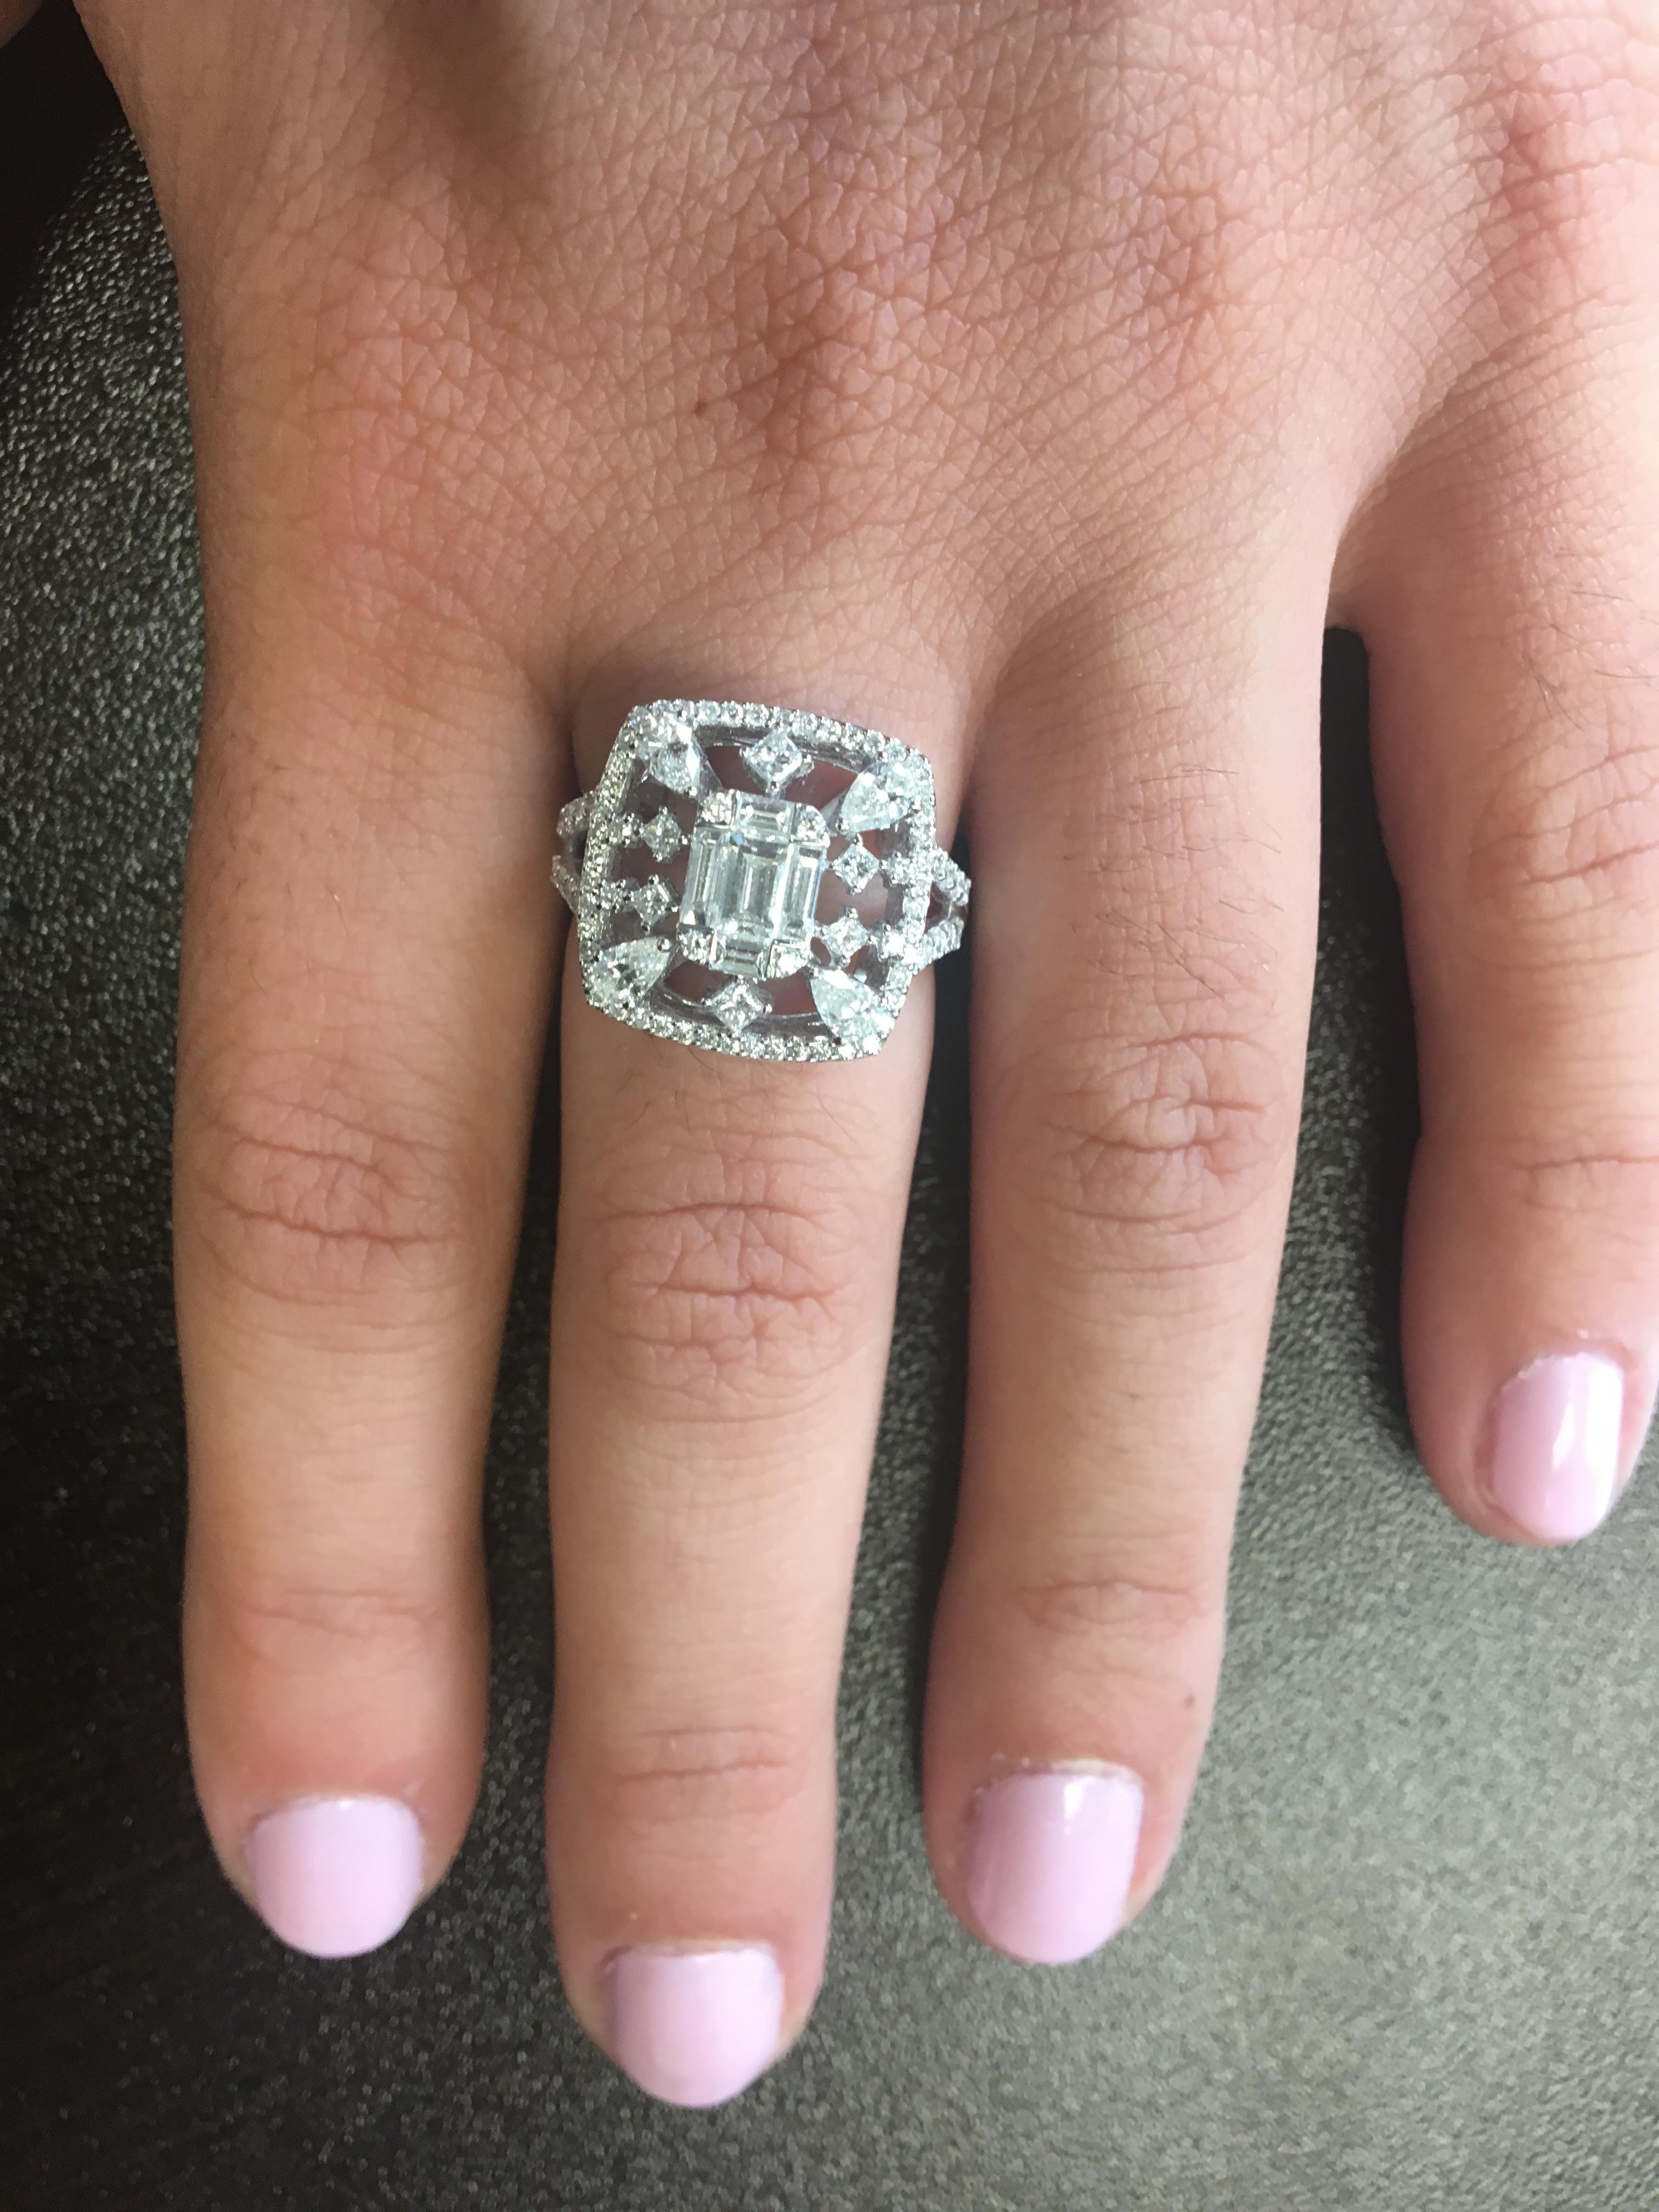 This stunning 18K white gold ring is set with an emerald cut illusion stone in the center, surrounded by multi cut stones. Pair shapes, princesses and round diamonds. It's a unique look and a statement piece. The total carat weight is 1.45 Ct. The